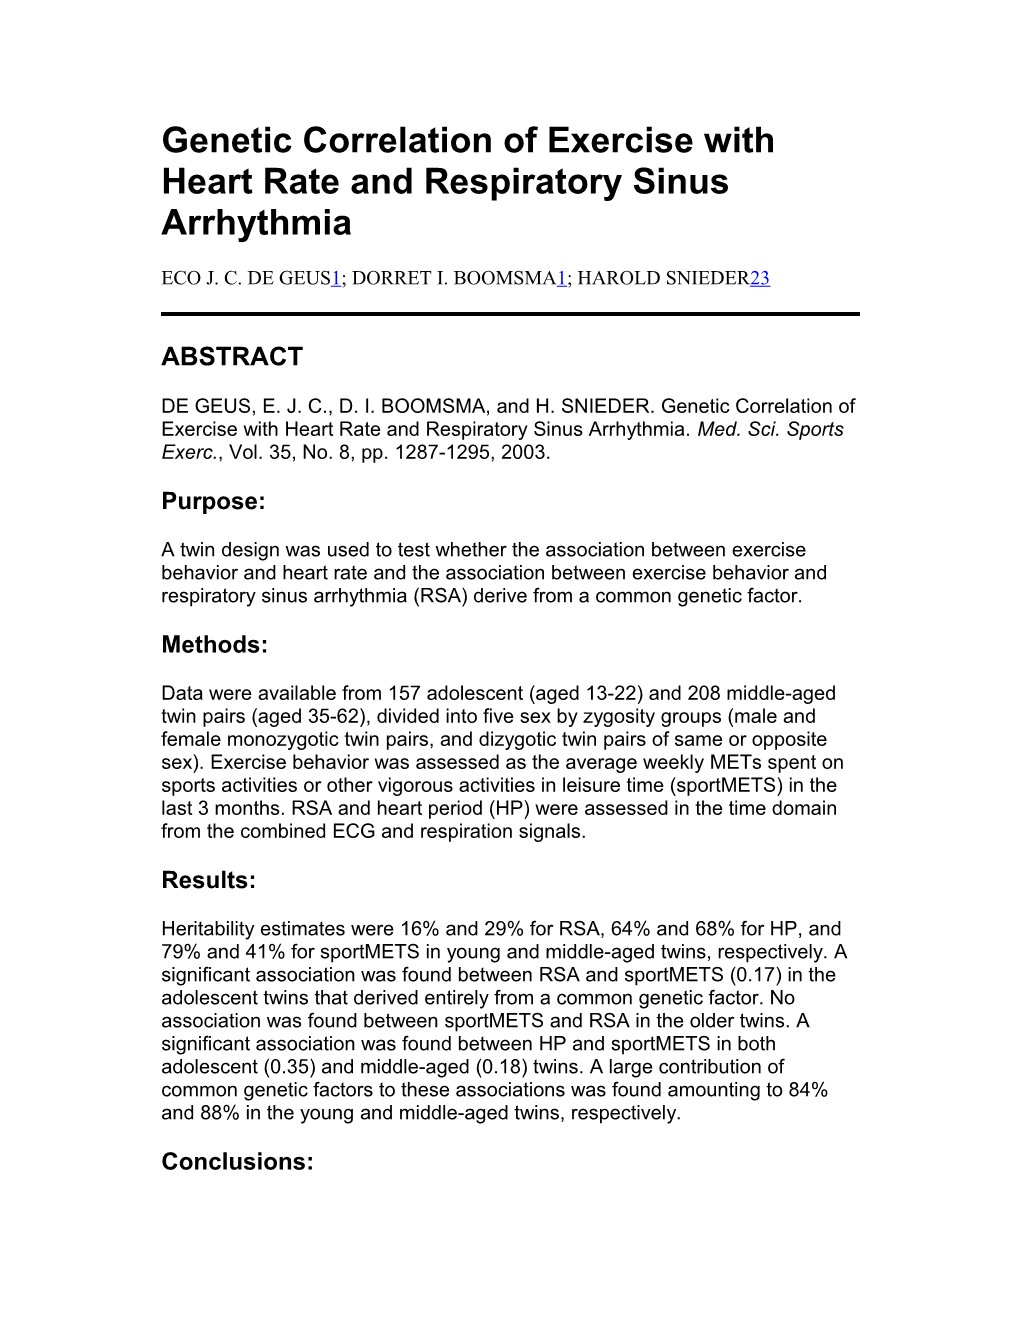 Genetic Correlation of Exercise with Heart Rate and Respiratory Sinus Arrhythmia